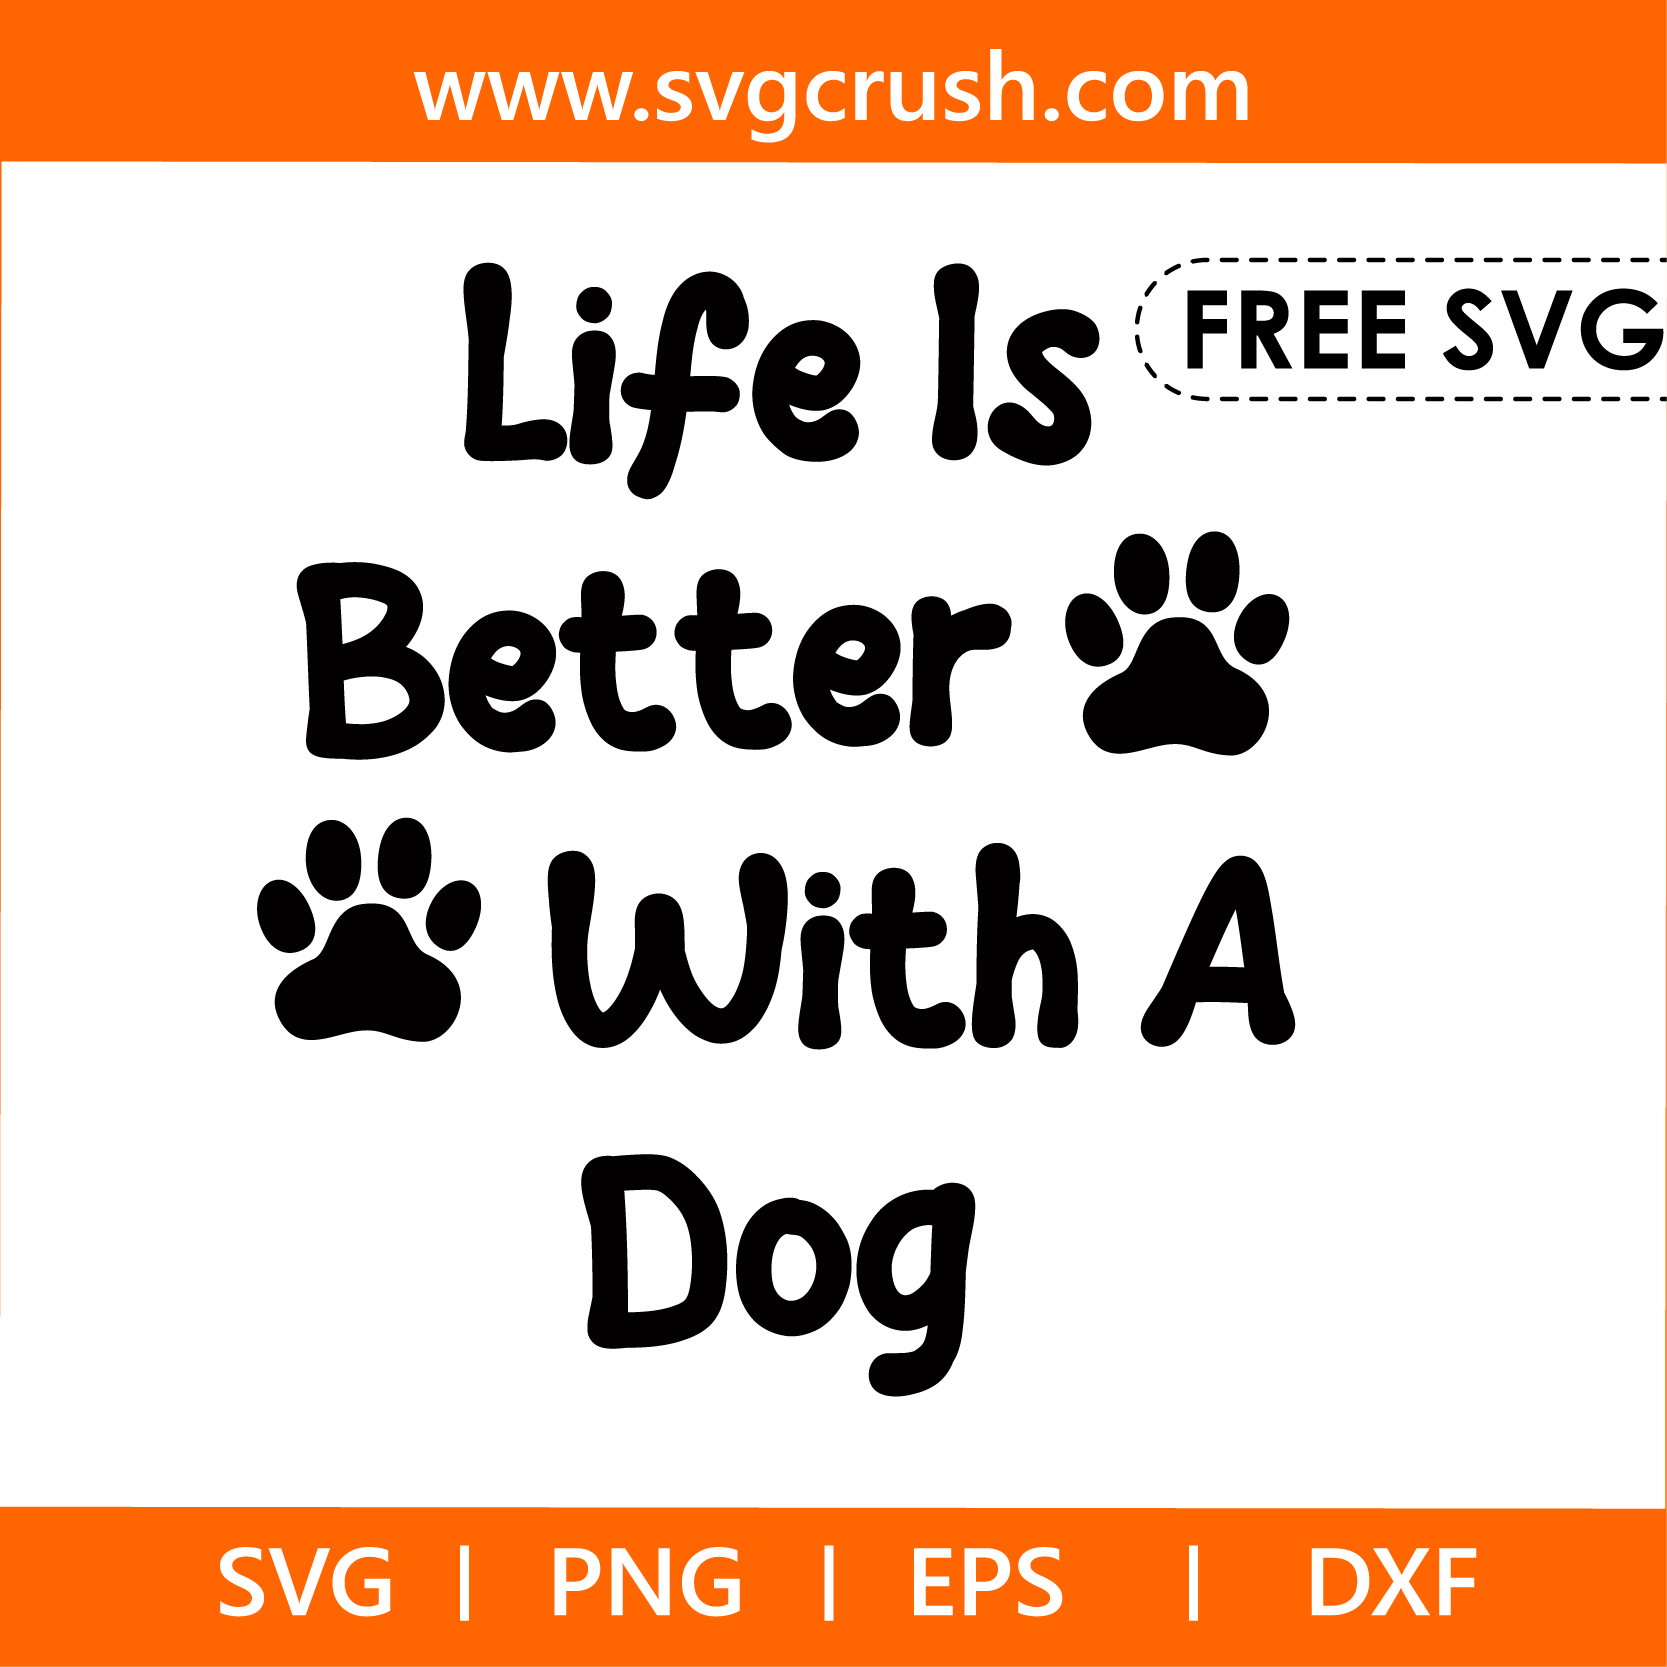 free life-is-better-with-dog-004 svg